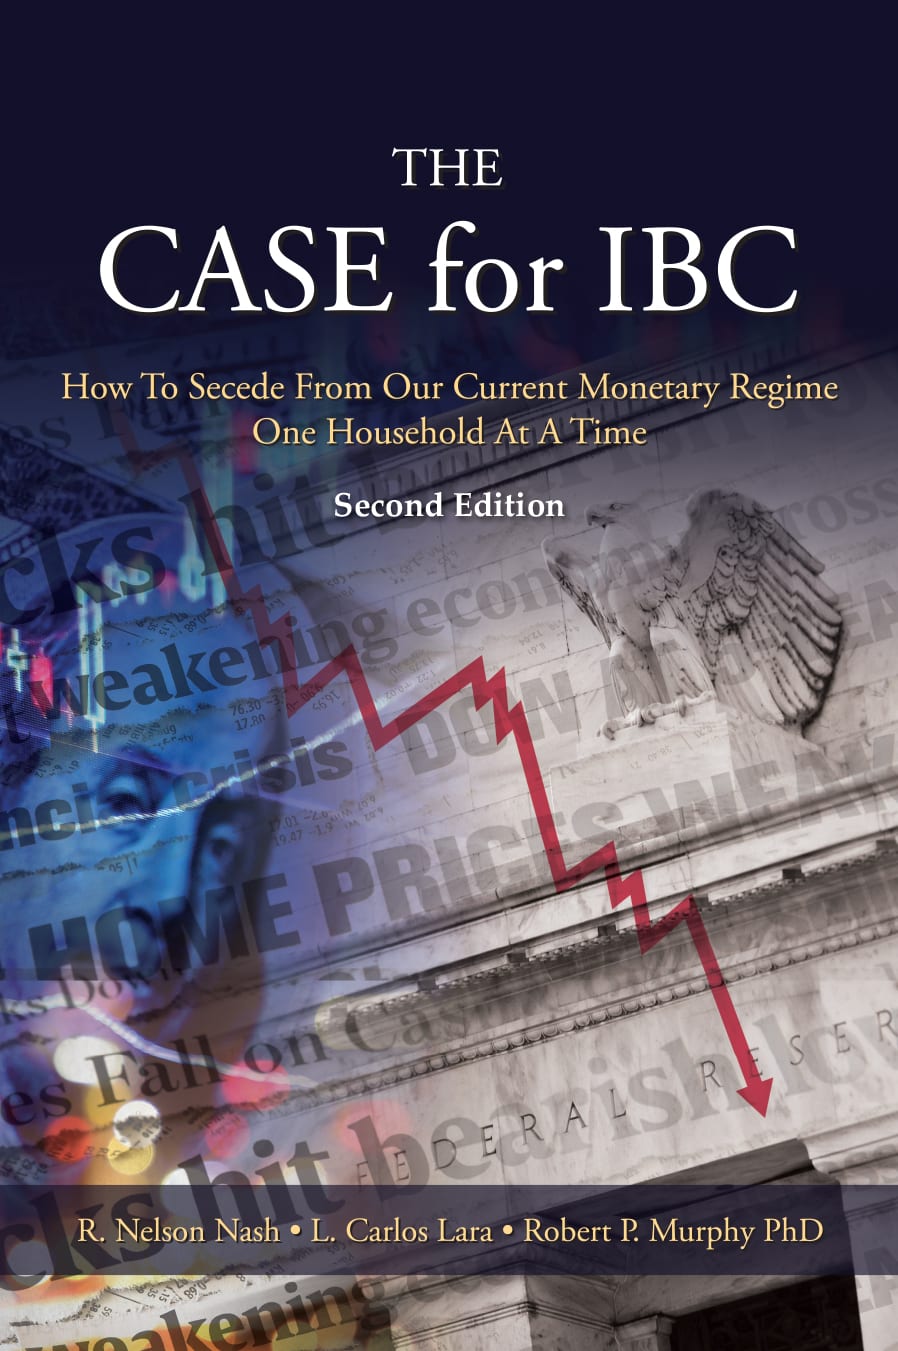 The Case for IBC